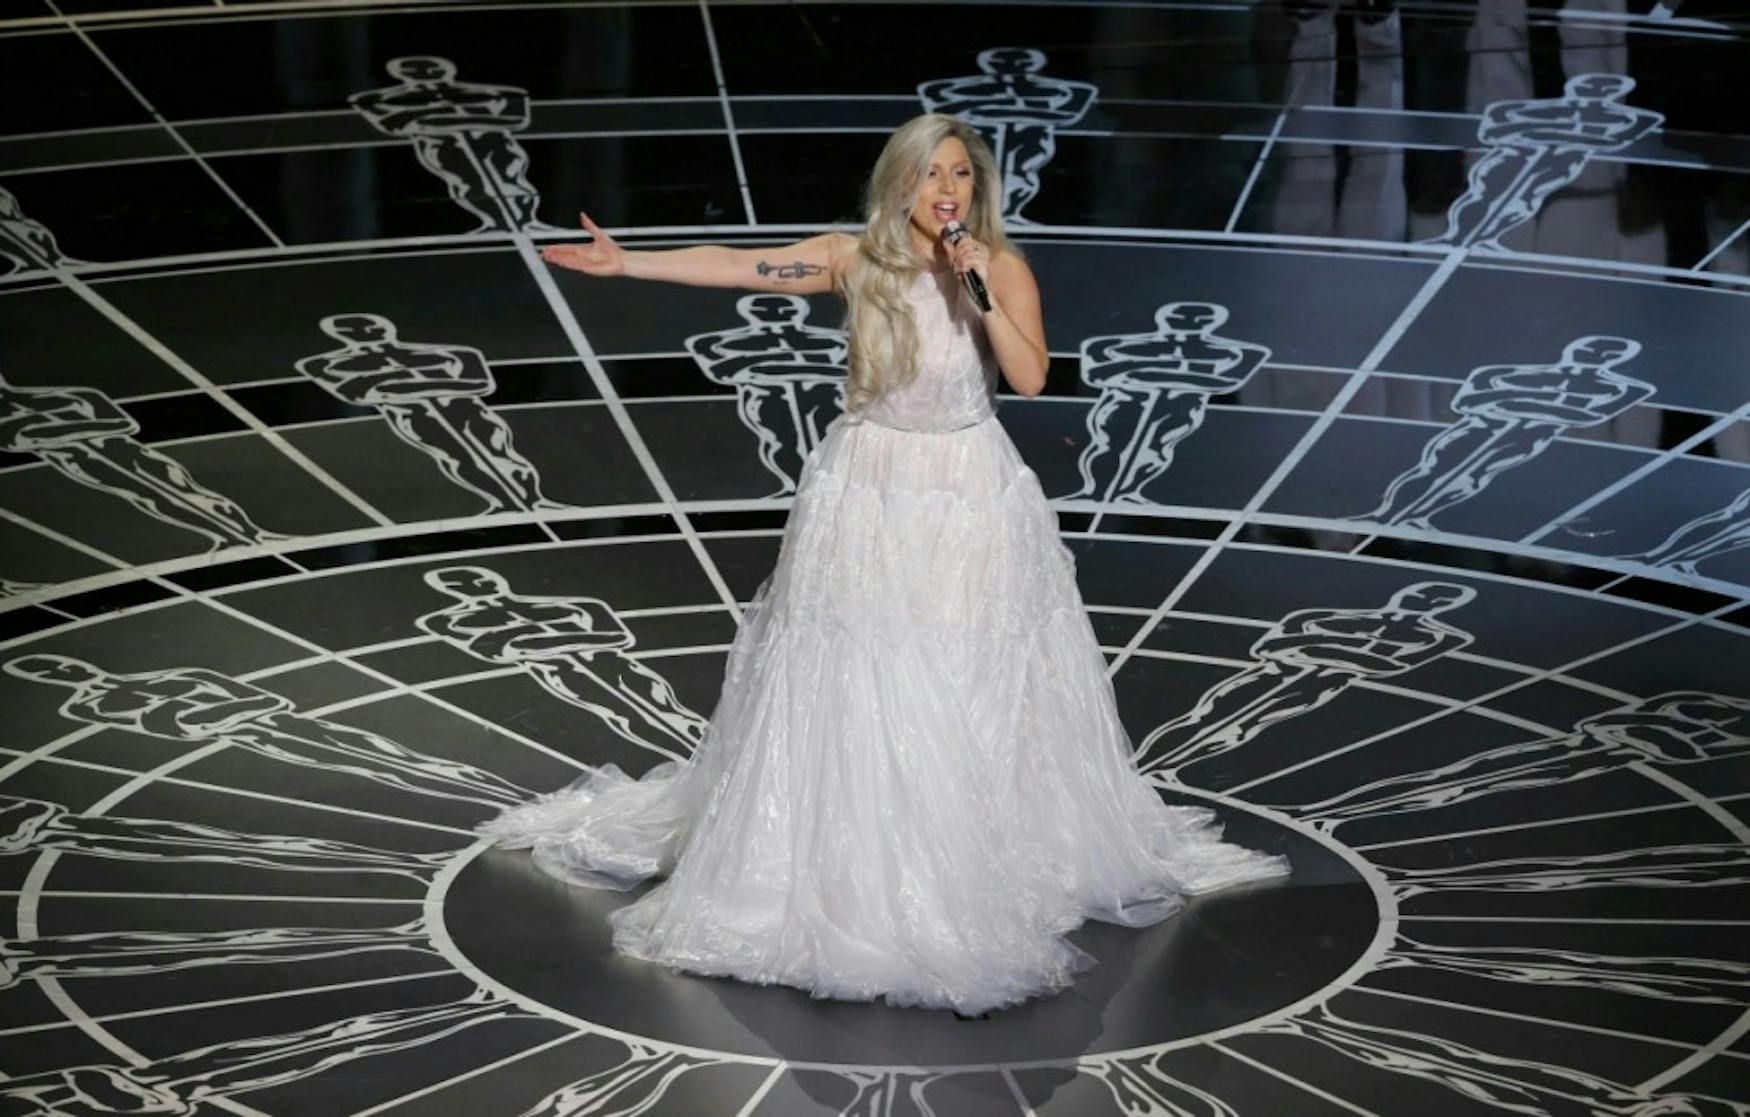 THE HILLS ARE ALIVE: Lady Gaga performed a Sound of Music compilation at the Oscars.